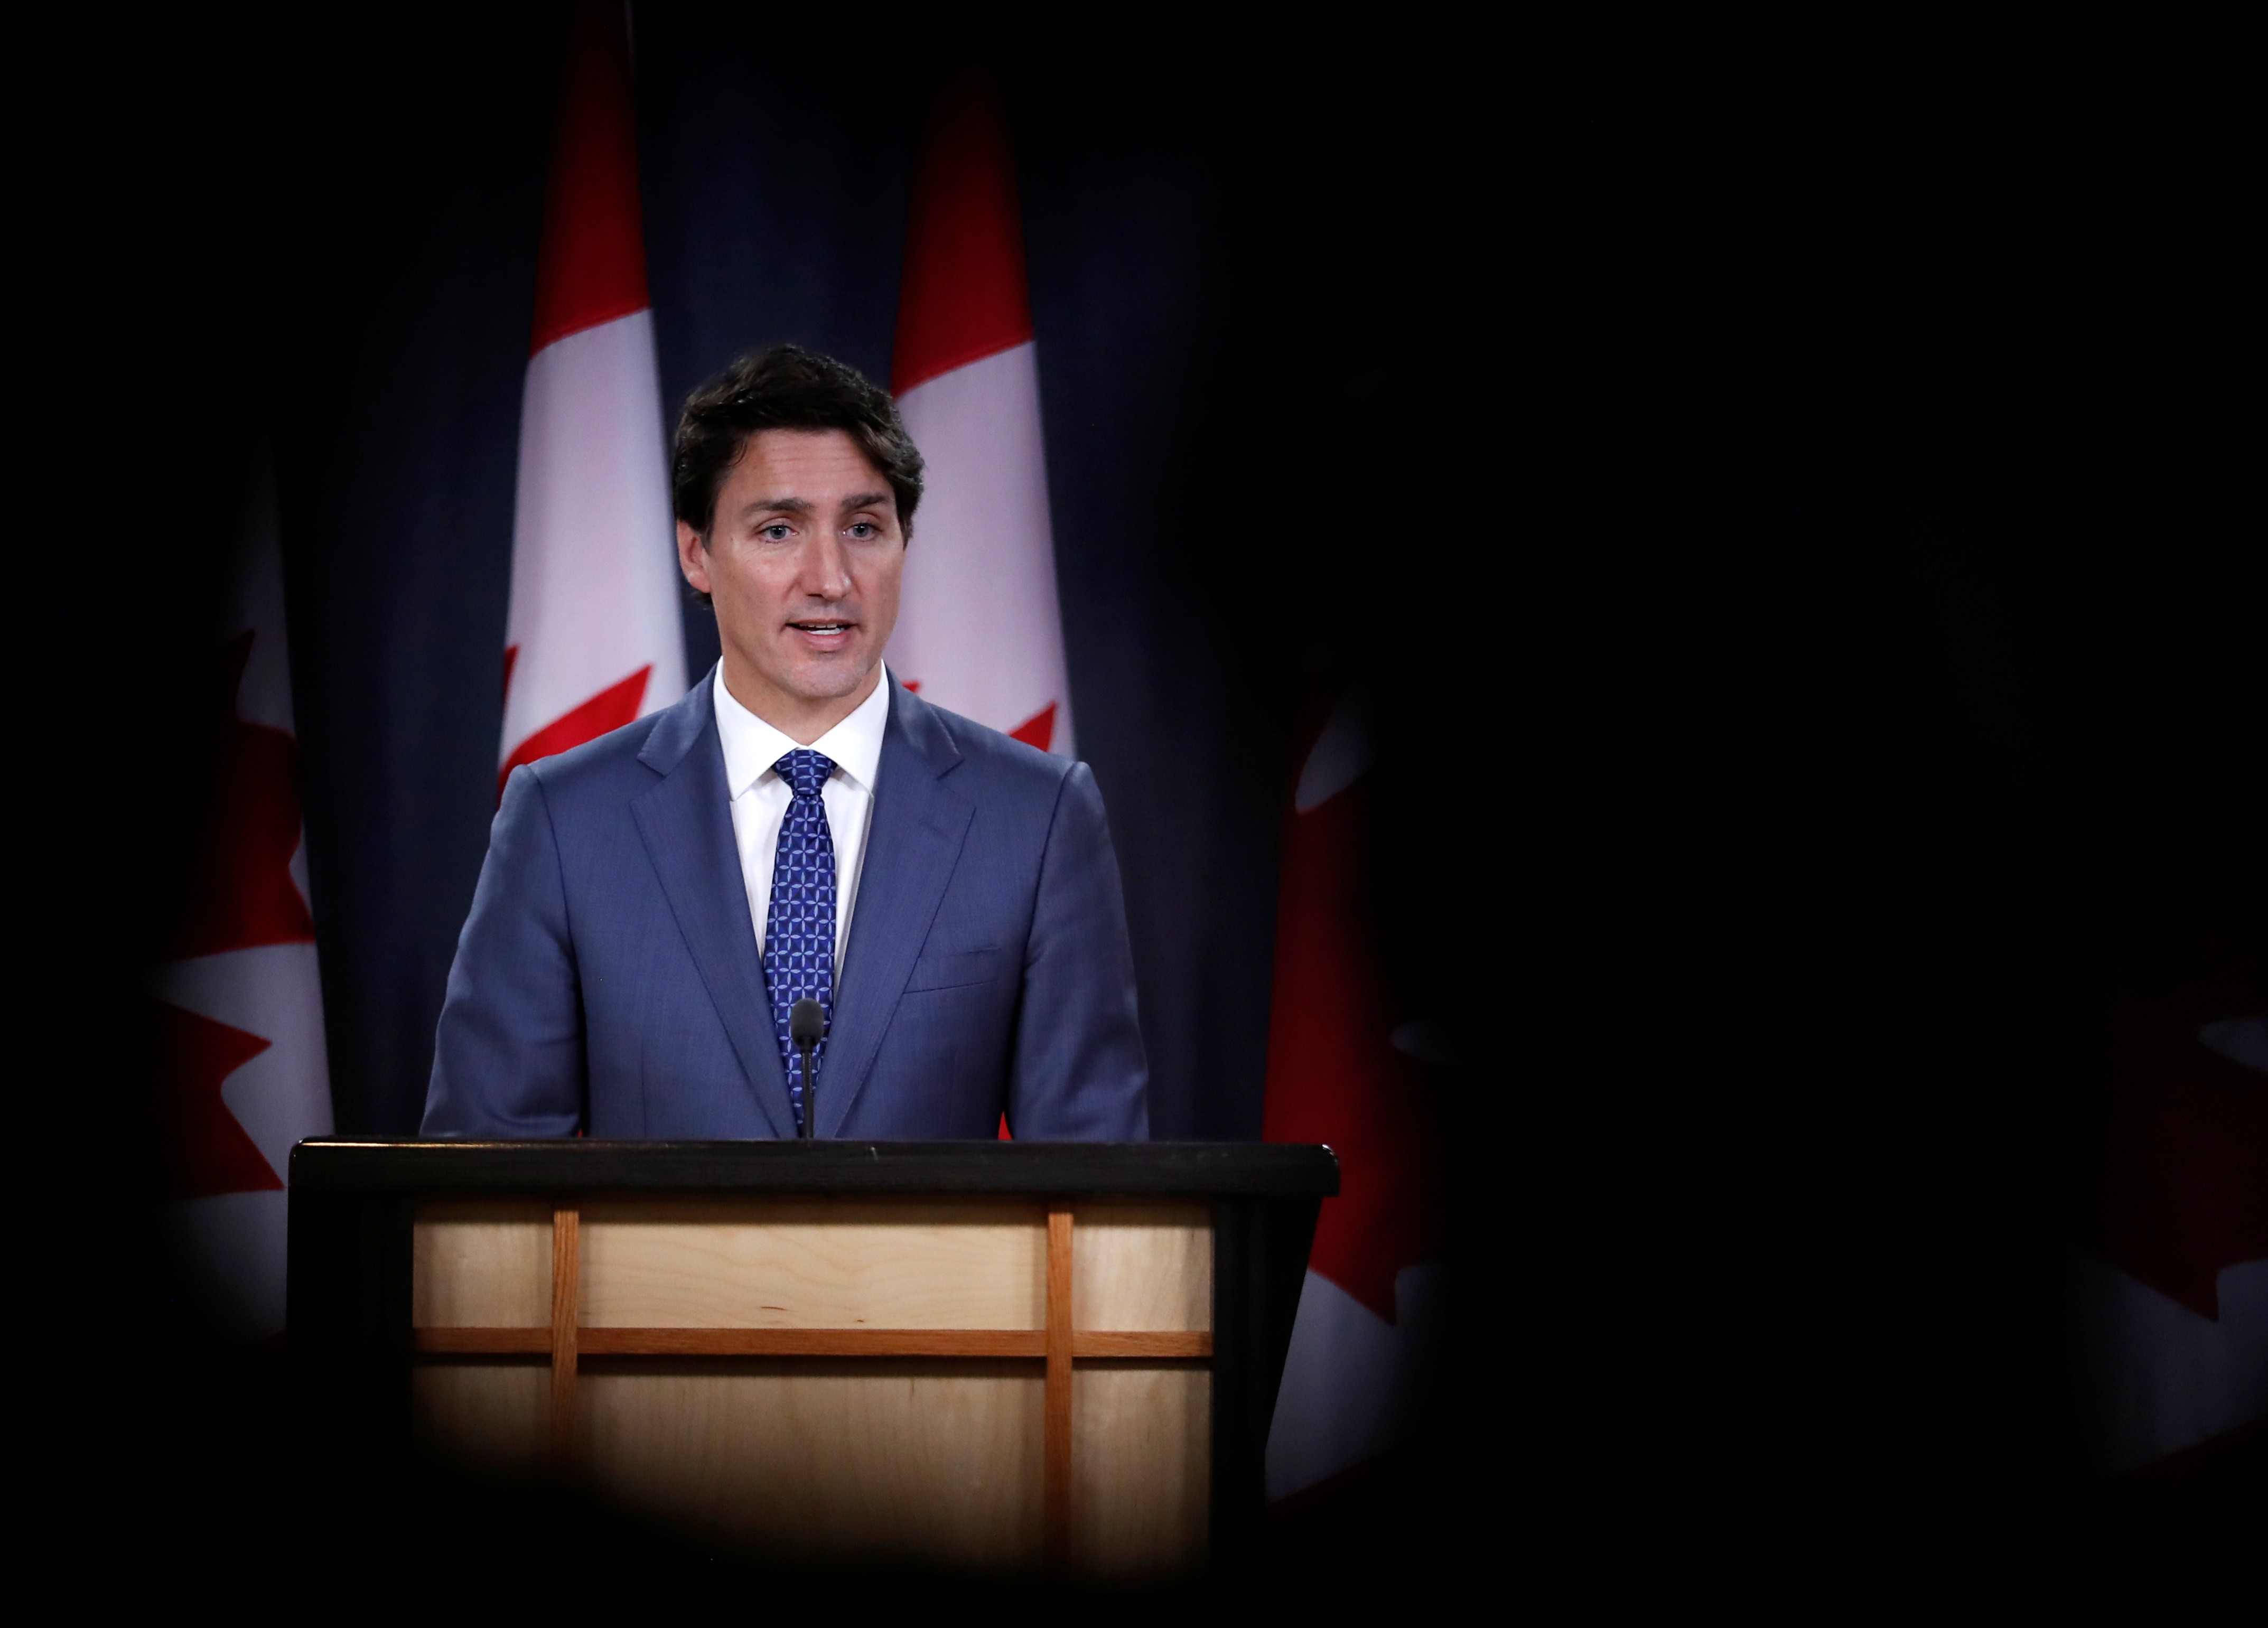 Canada’s Prime Minister Justin Trudeau is under renewed pressure to speak out on the Hong Kong protests. Photo: Reuters